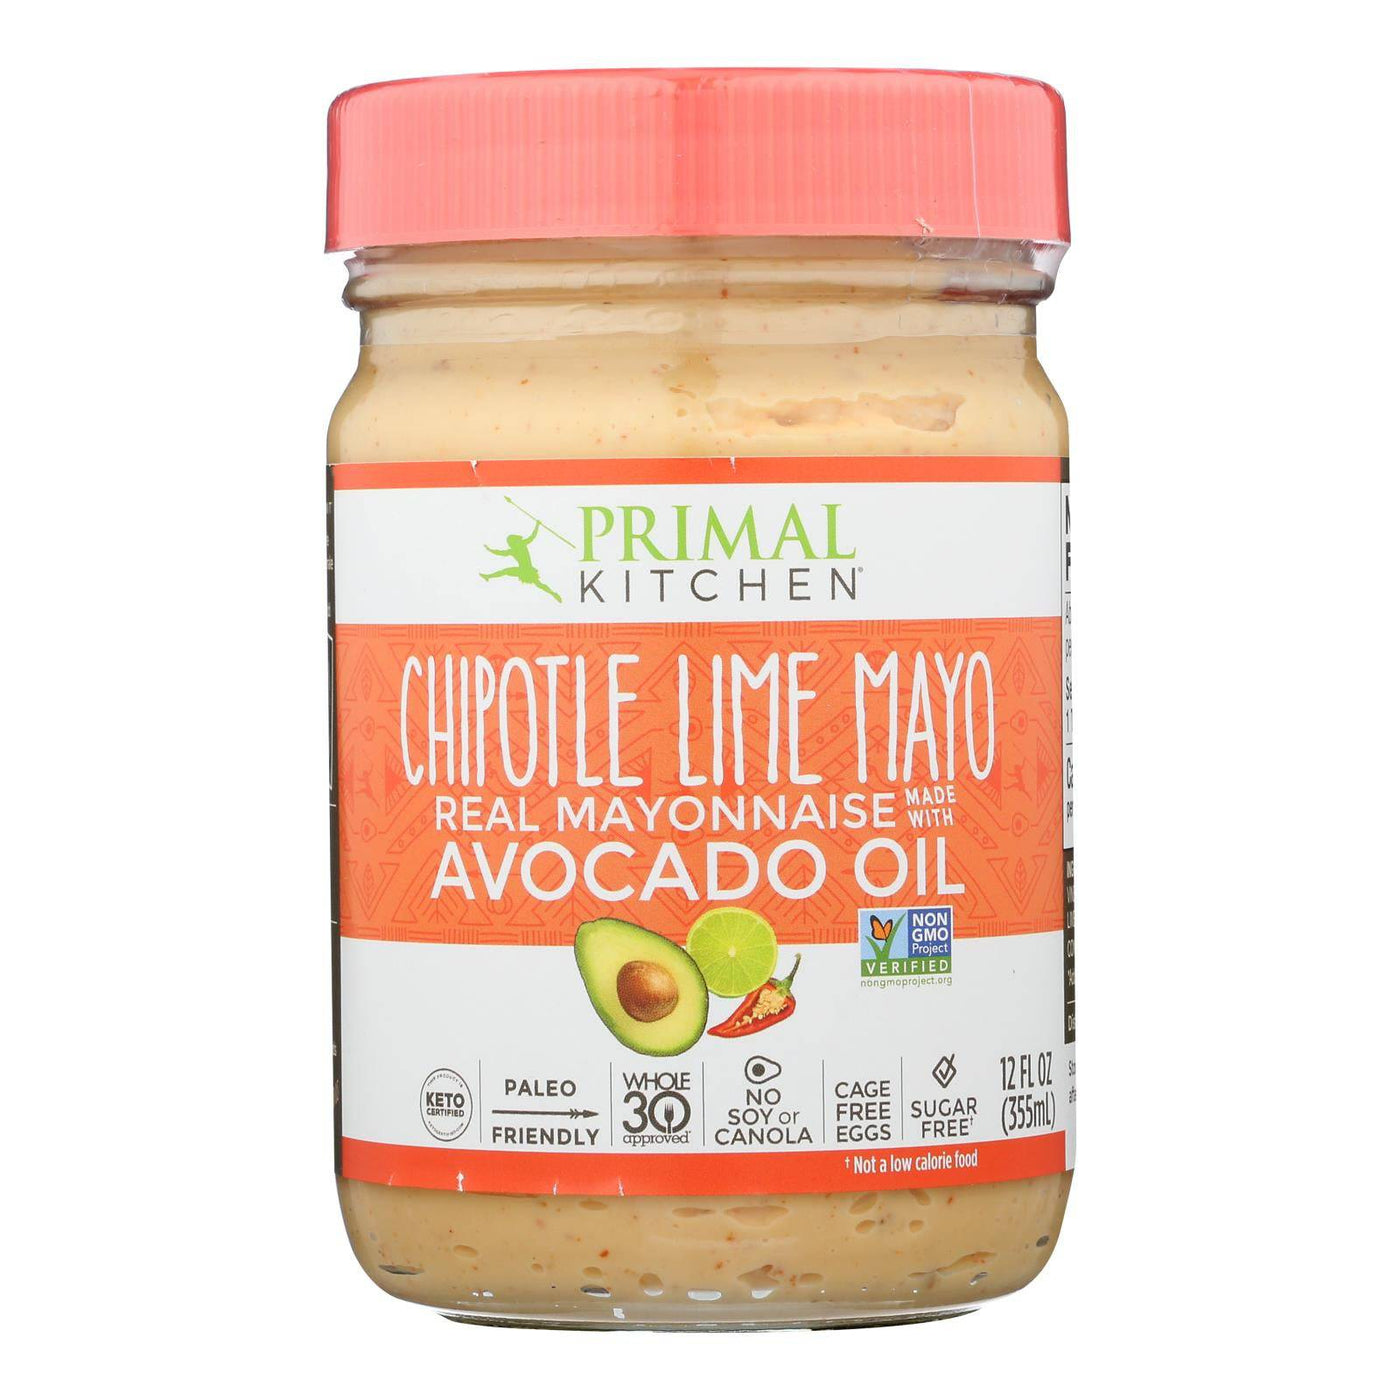 Primal Kitchen Chipotle Lime Mayo - Avocado Oil - Case Of 6 - 12 Oz. | OnlyNaturals.us